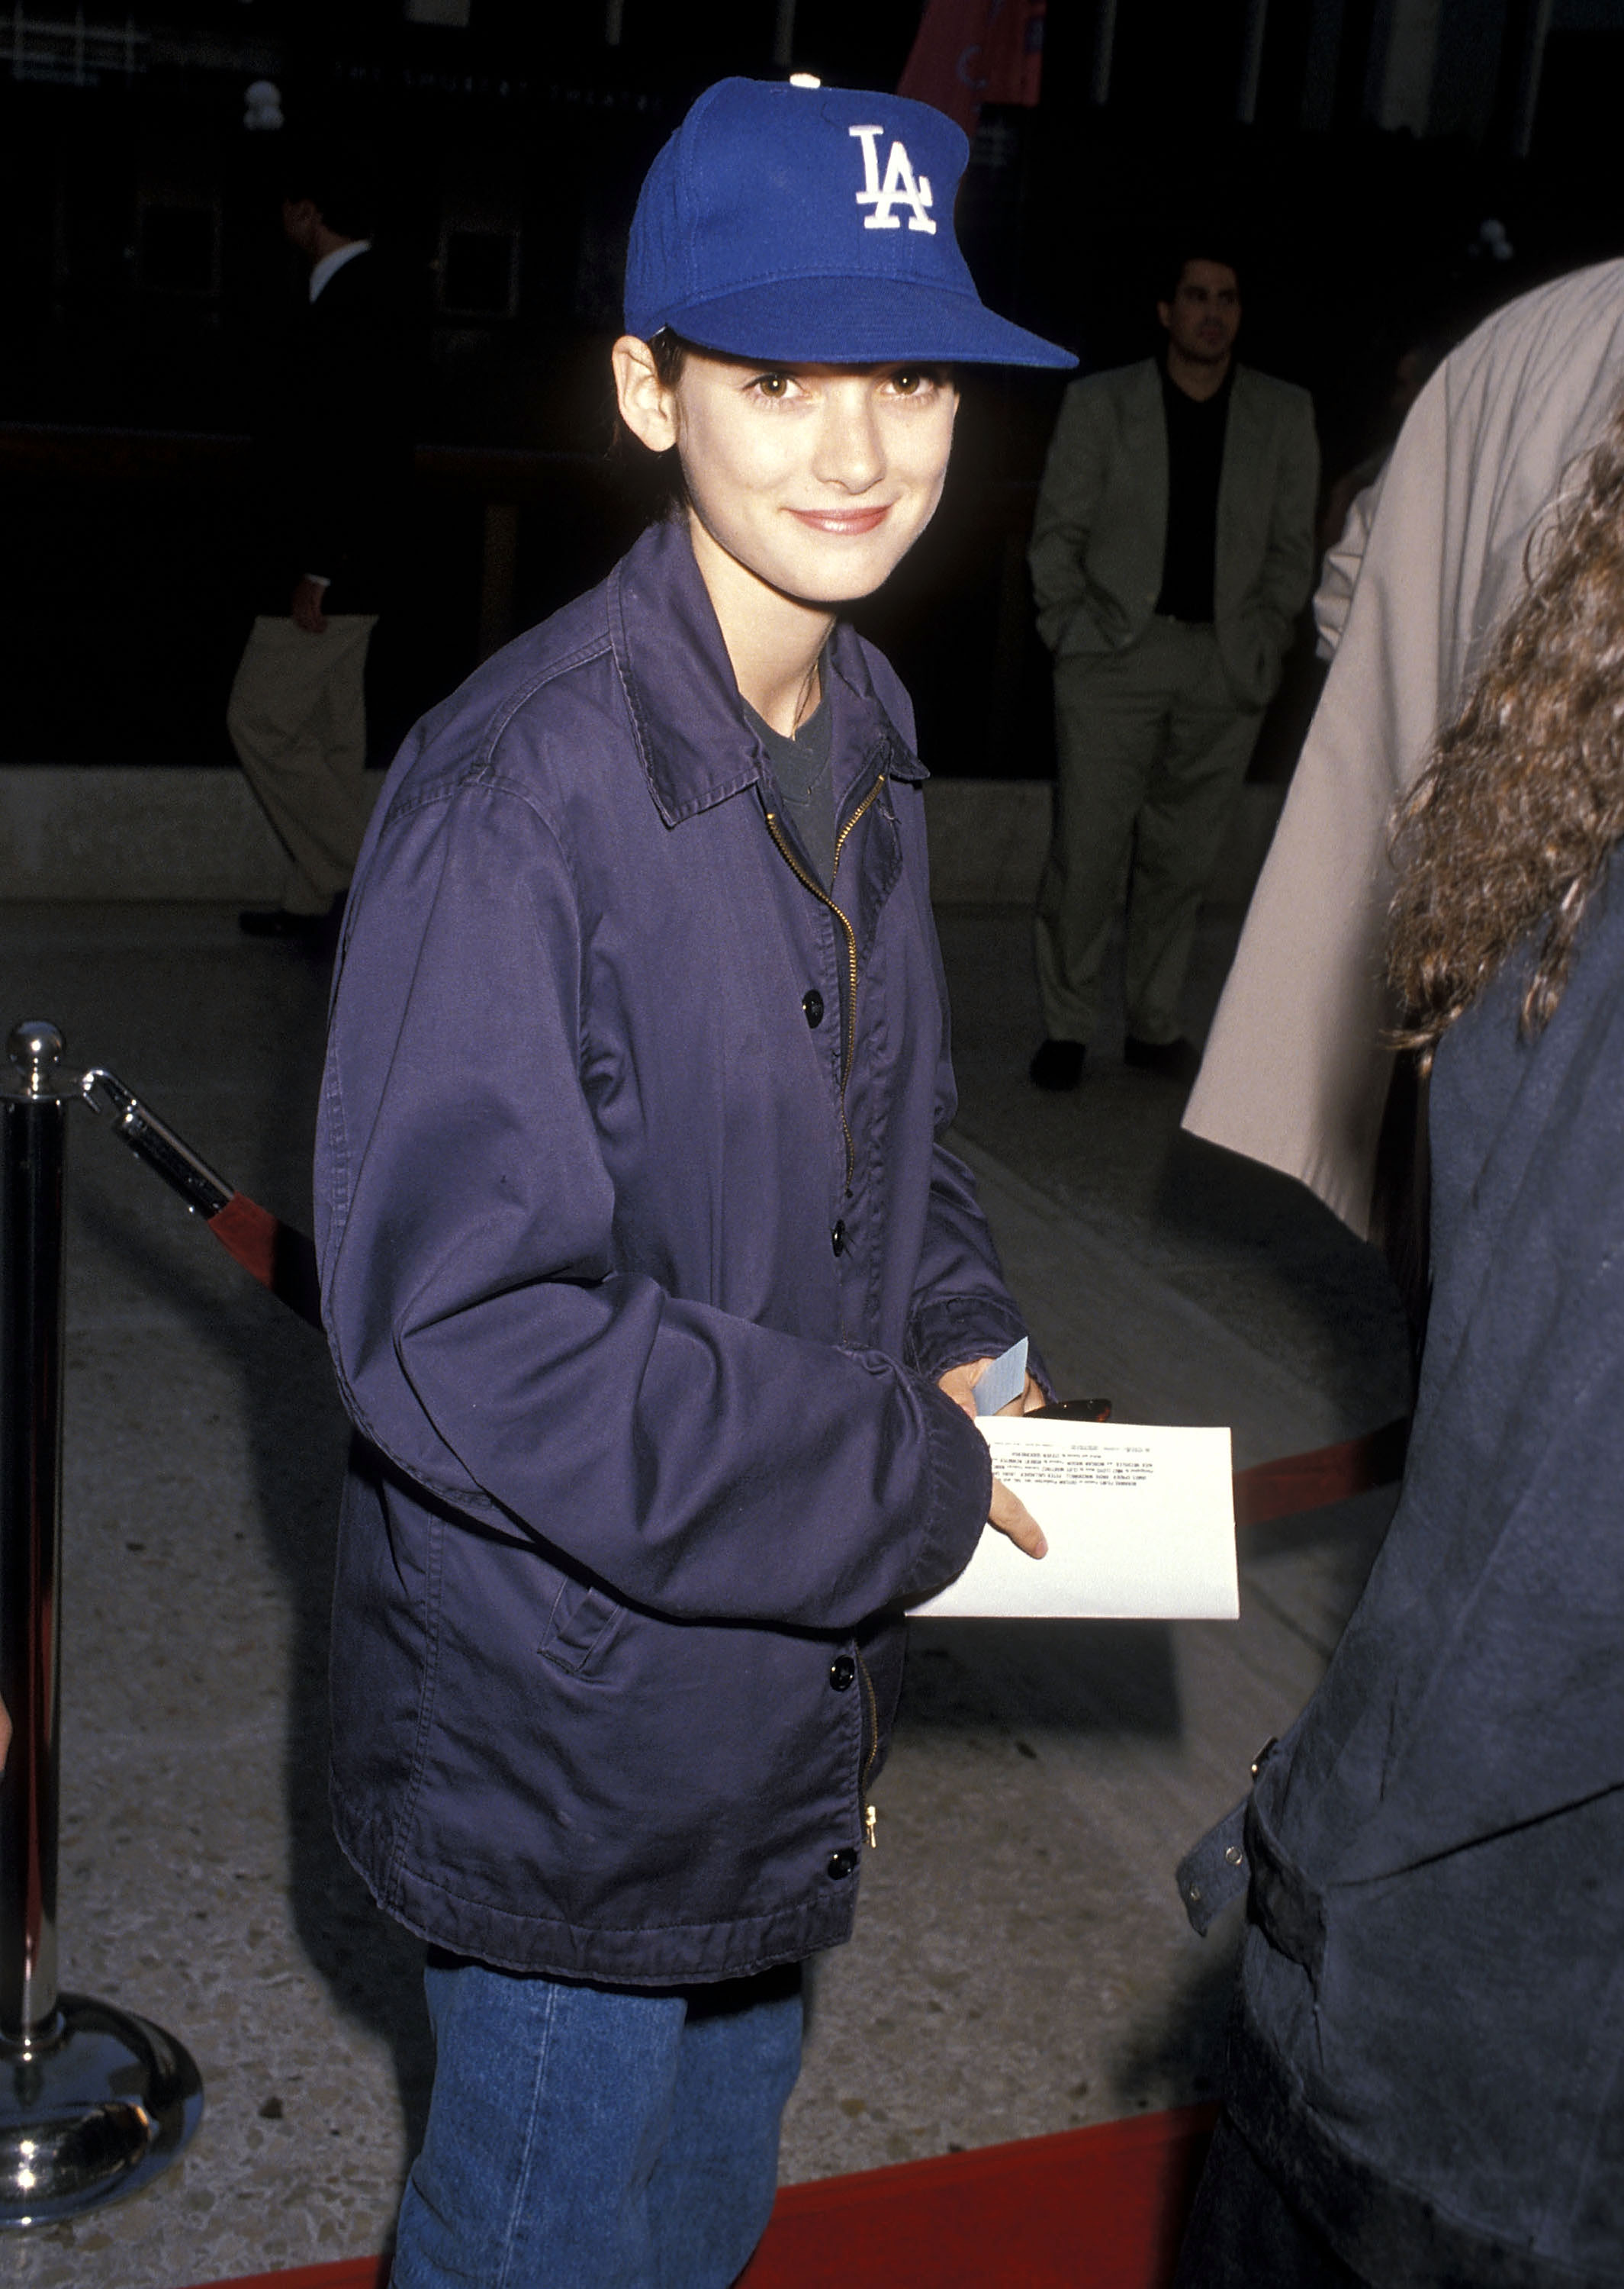 Winona Ryder at the "Sex, Lies, and Videotape" in Century City, 1989 | Source: Getty Images